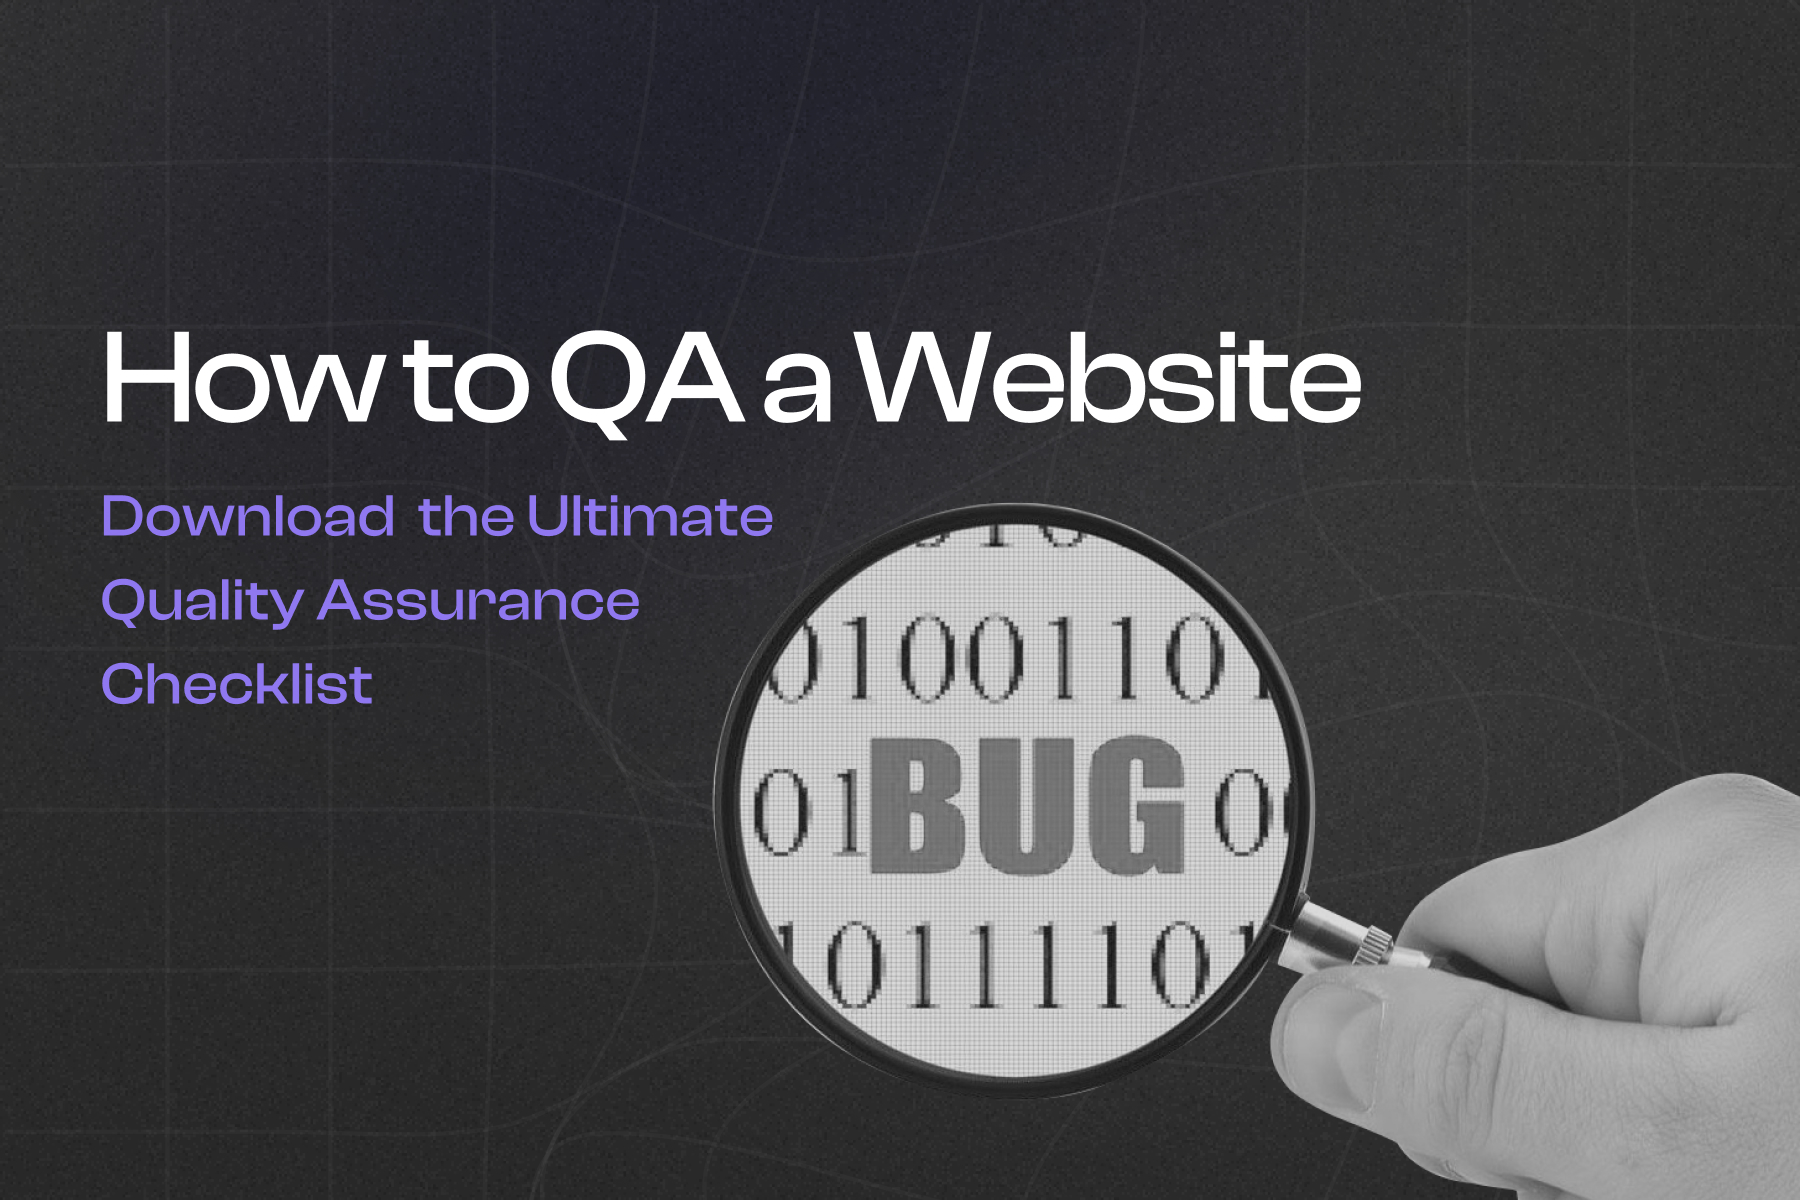 How to QA a Website Download the Ultimate Quality Assurance Checklist